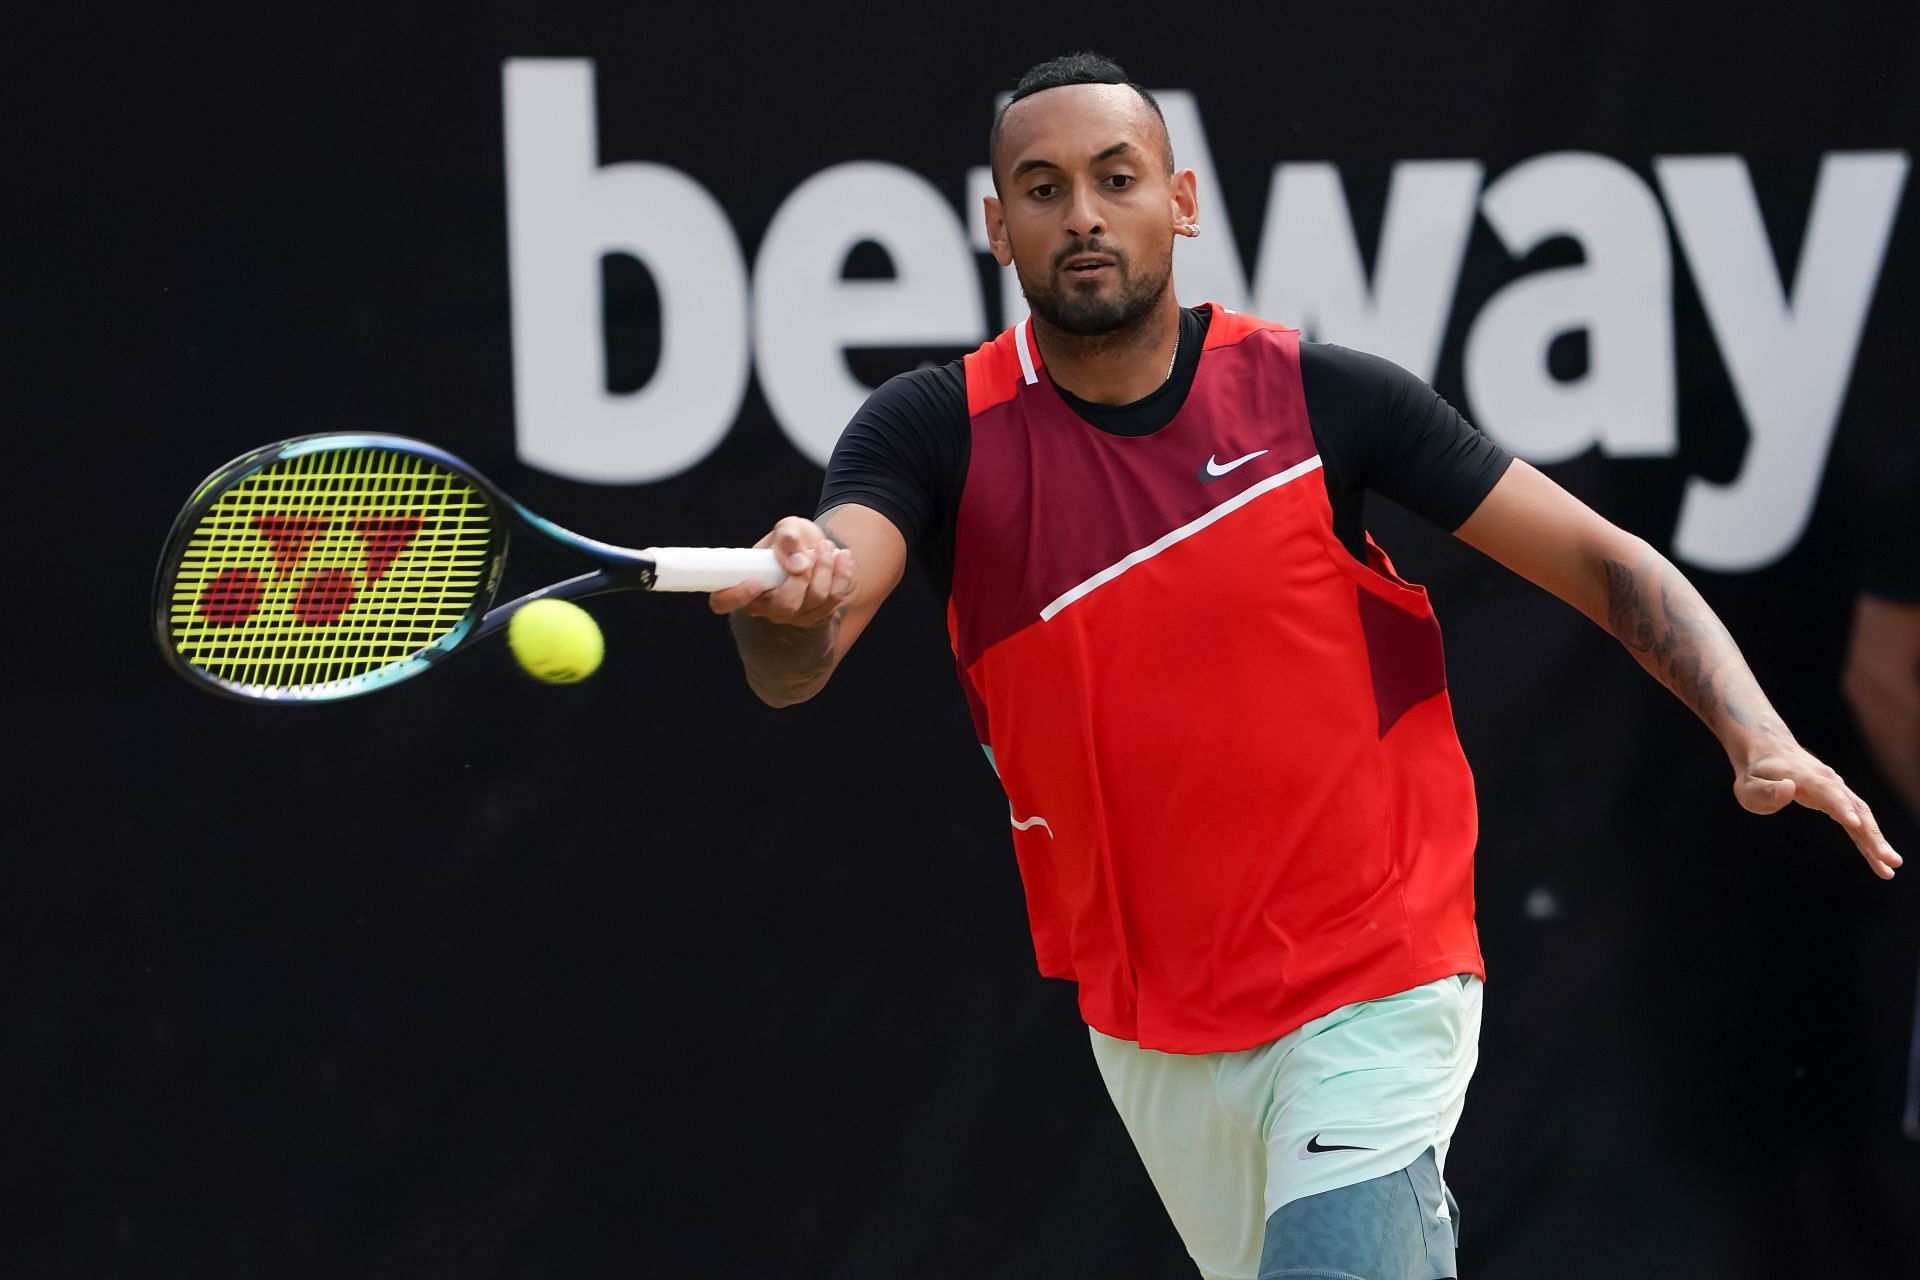 Nick Kyrgios was disappointed with Wimbledon for banning Russian and Belaruisan players